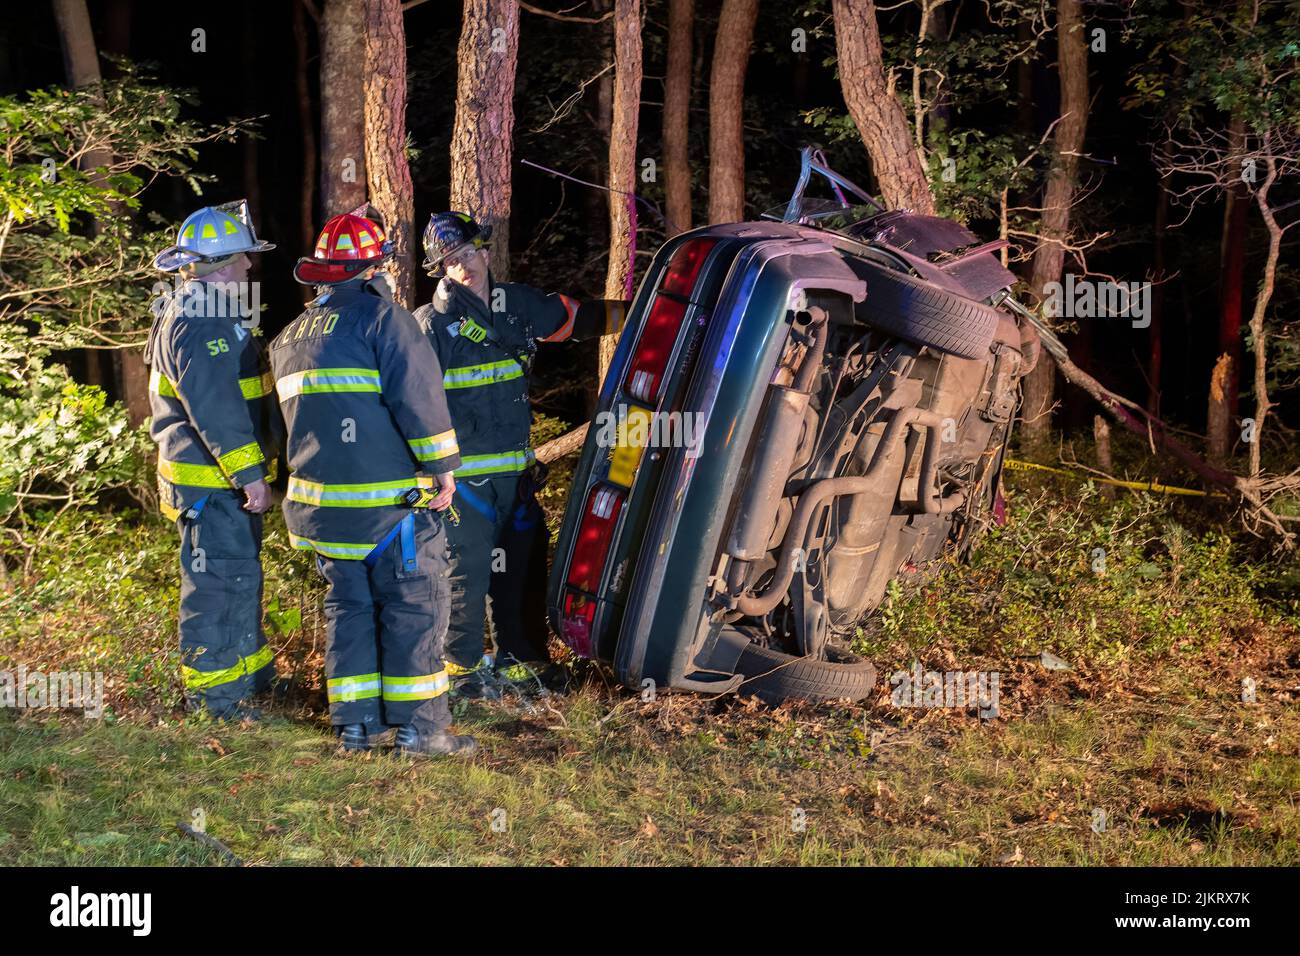 At 11:33 p.m. on Monday, September 16th, members of the East Hampton Fire Department were called to Daniels Hole Road near the LIRR trestle for a repo Stock Photo